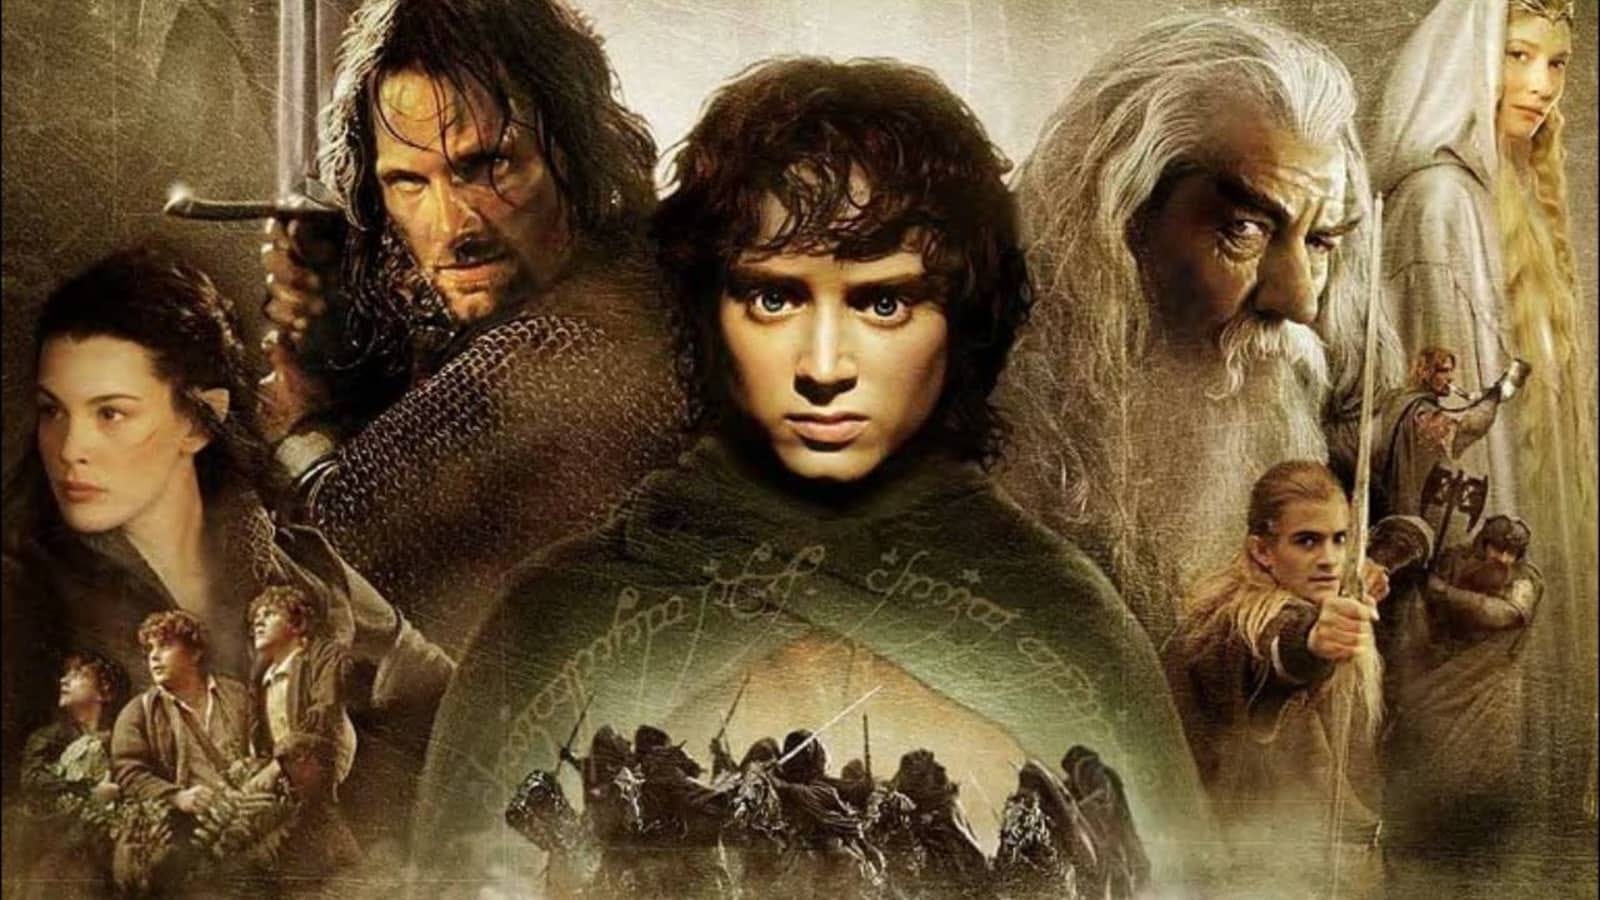 s 'The Lord of the Rings' Adds 20 New Cast Members